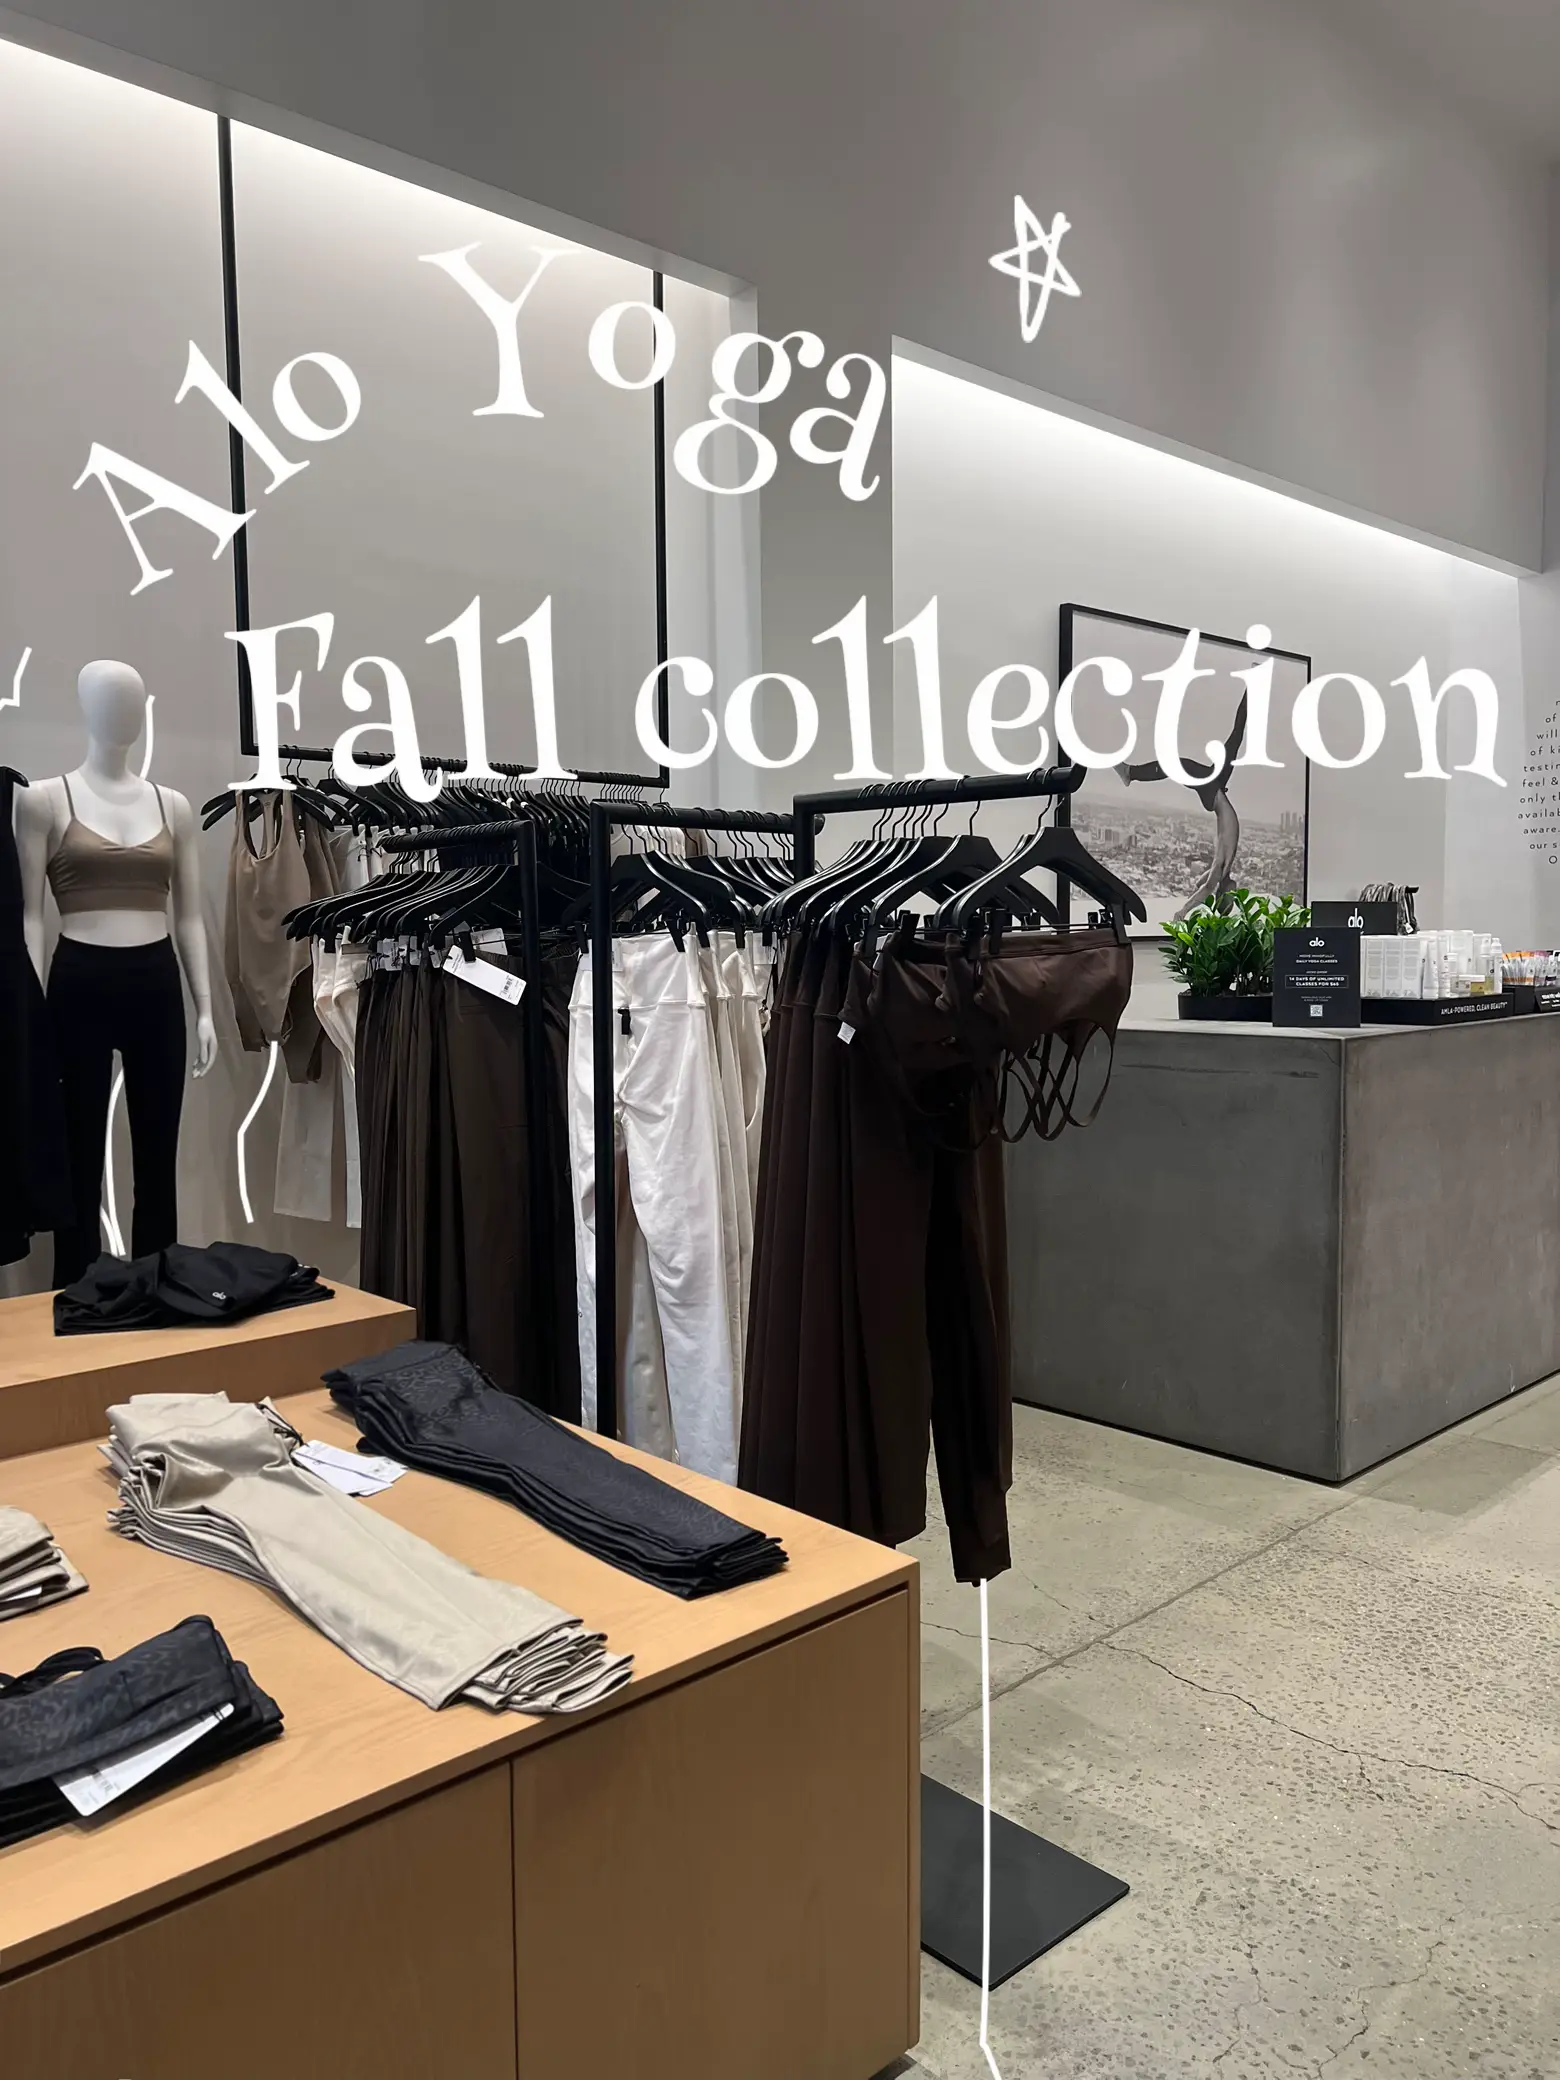 ALO YOGA FALL COLLECTION, Gallery posted by Biancacristino